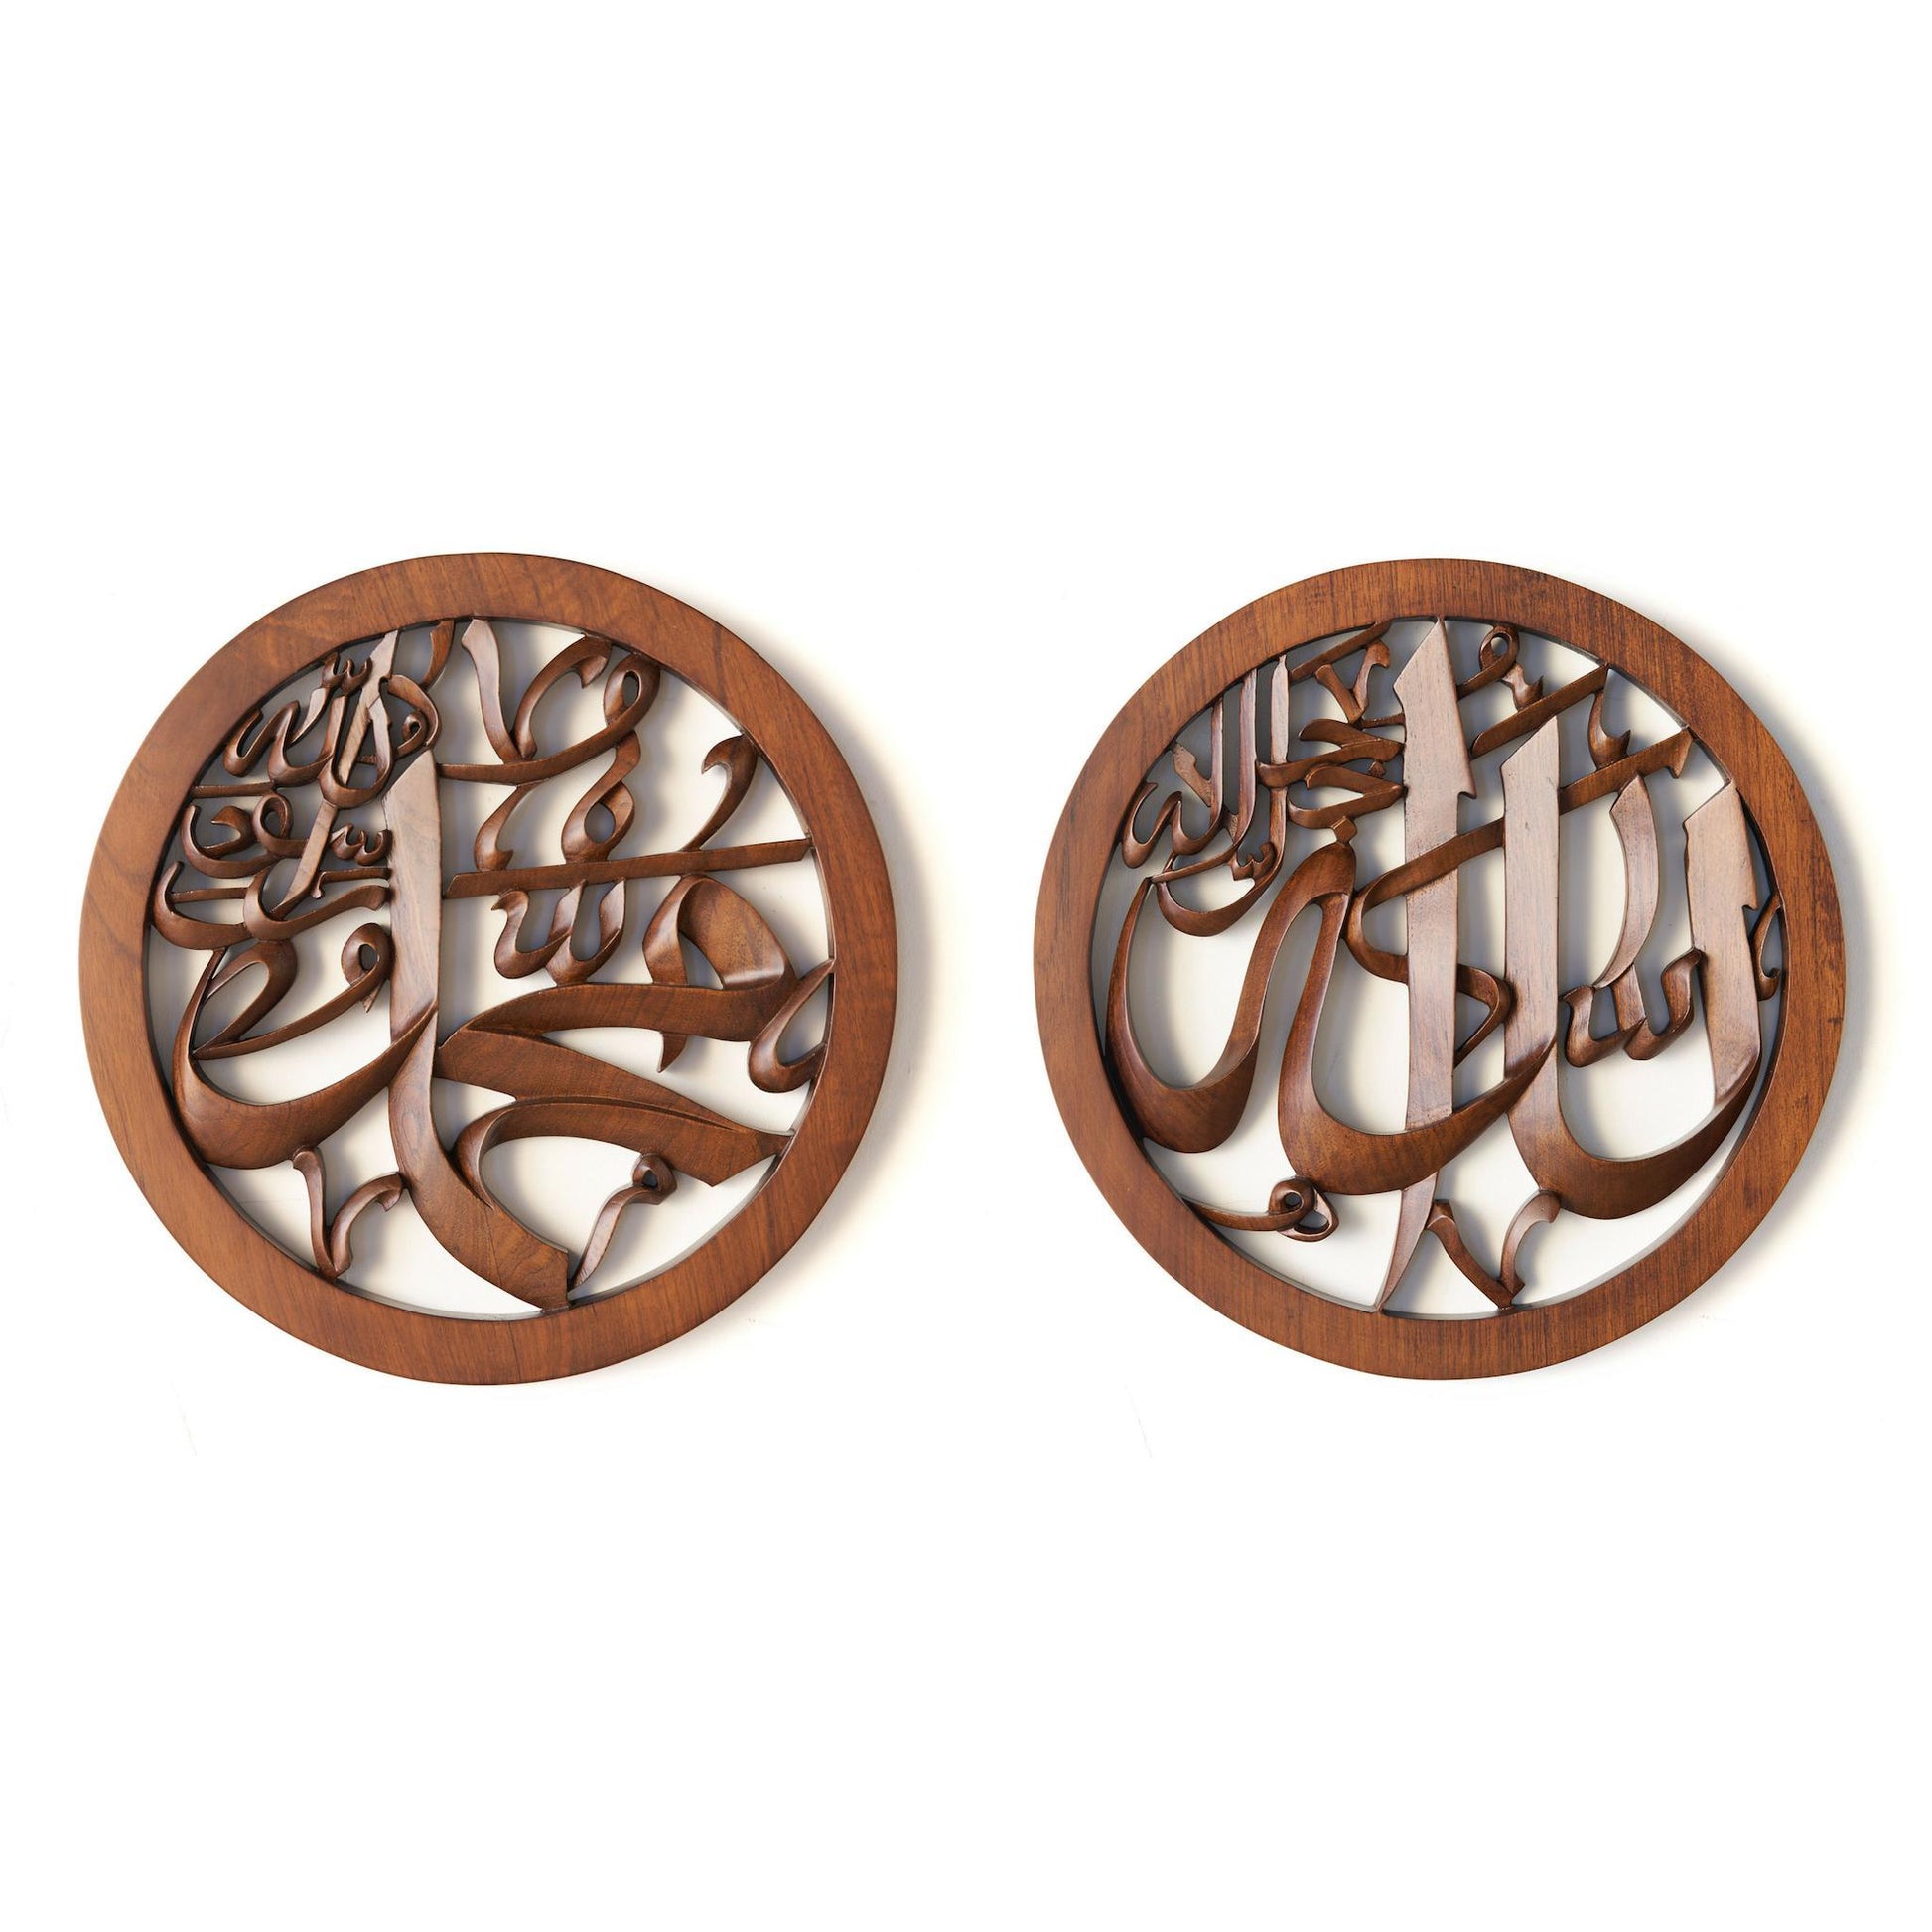 Allah SWT & Muhammad SAW Wall Decor by  Mahajati. Best Islamic Gift Ideas and Wall Decoration of Wood Carving.